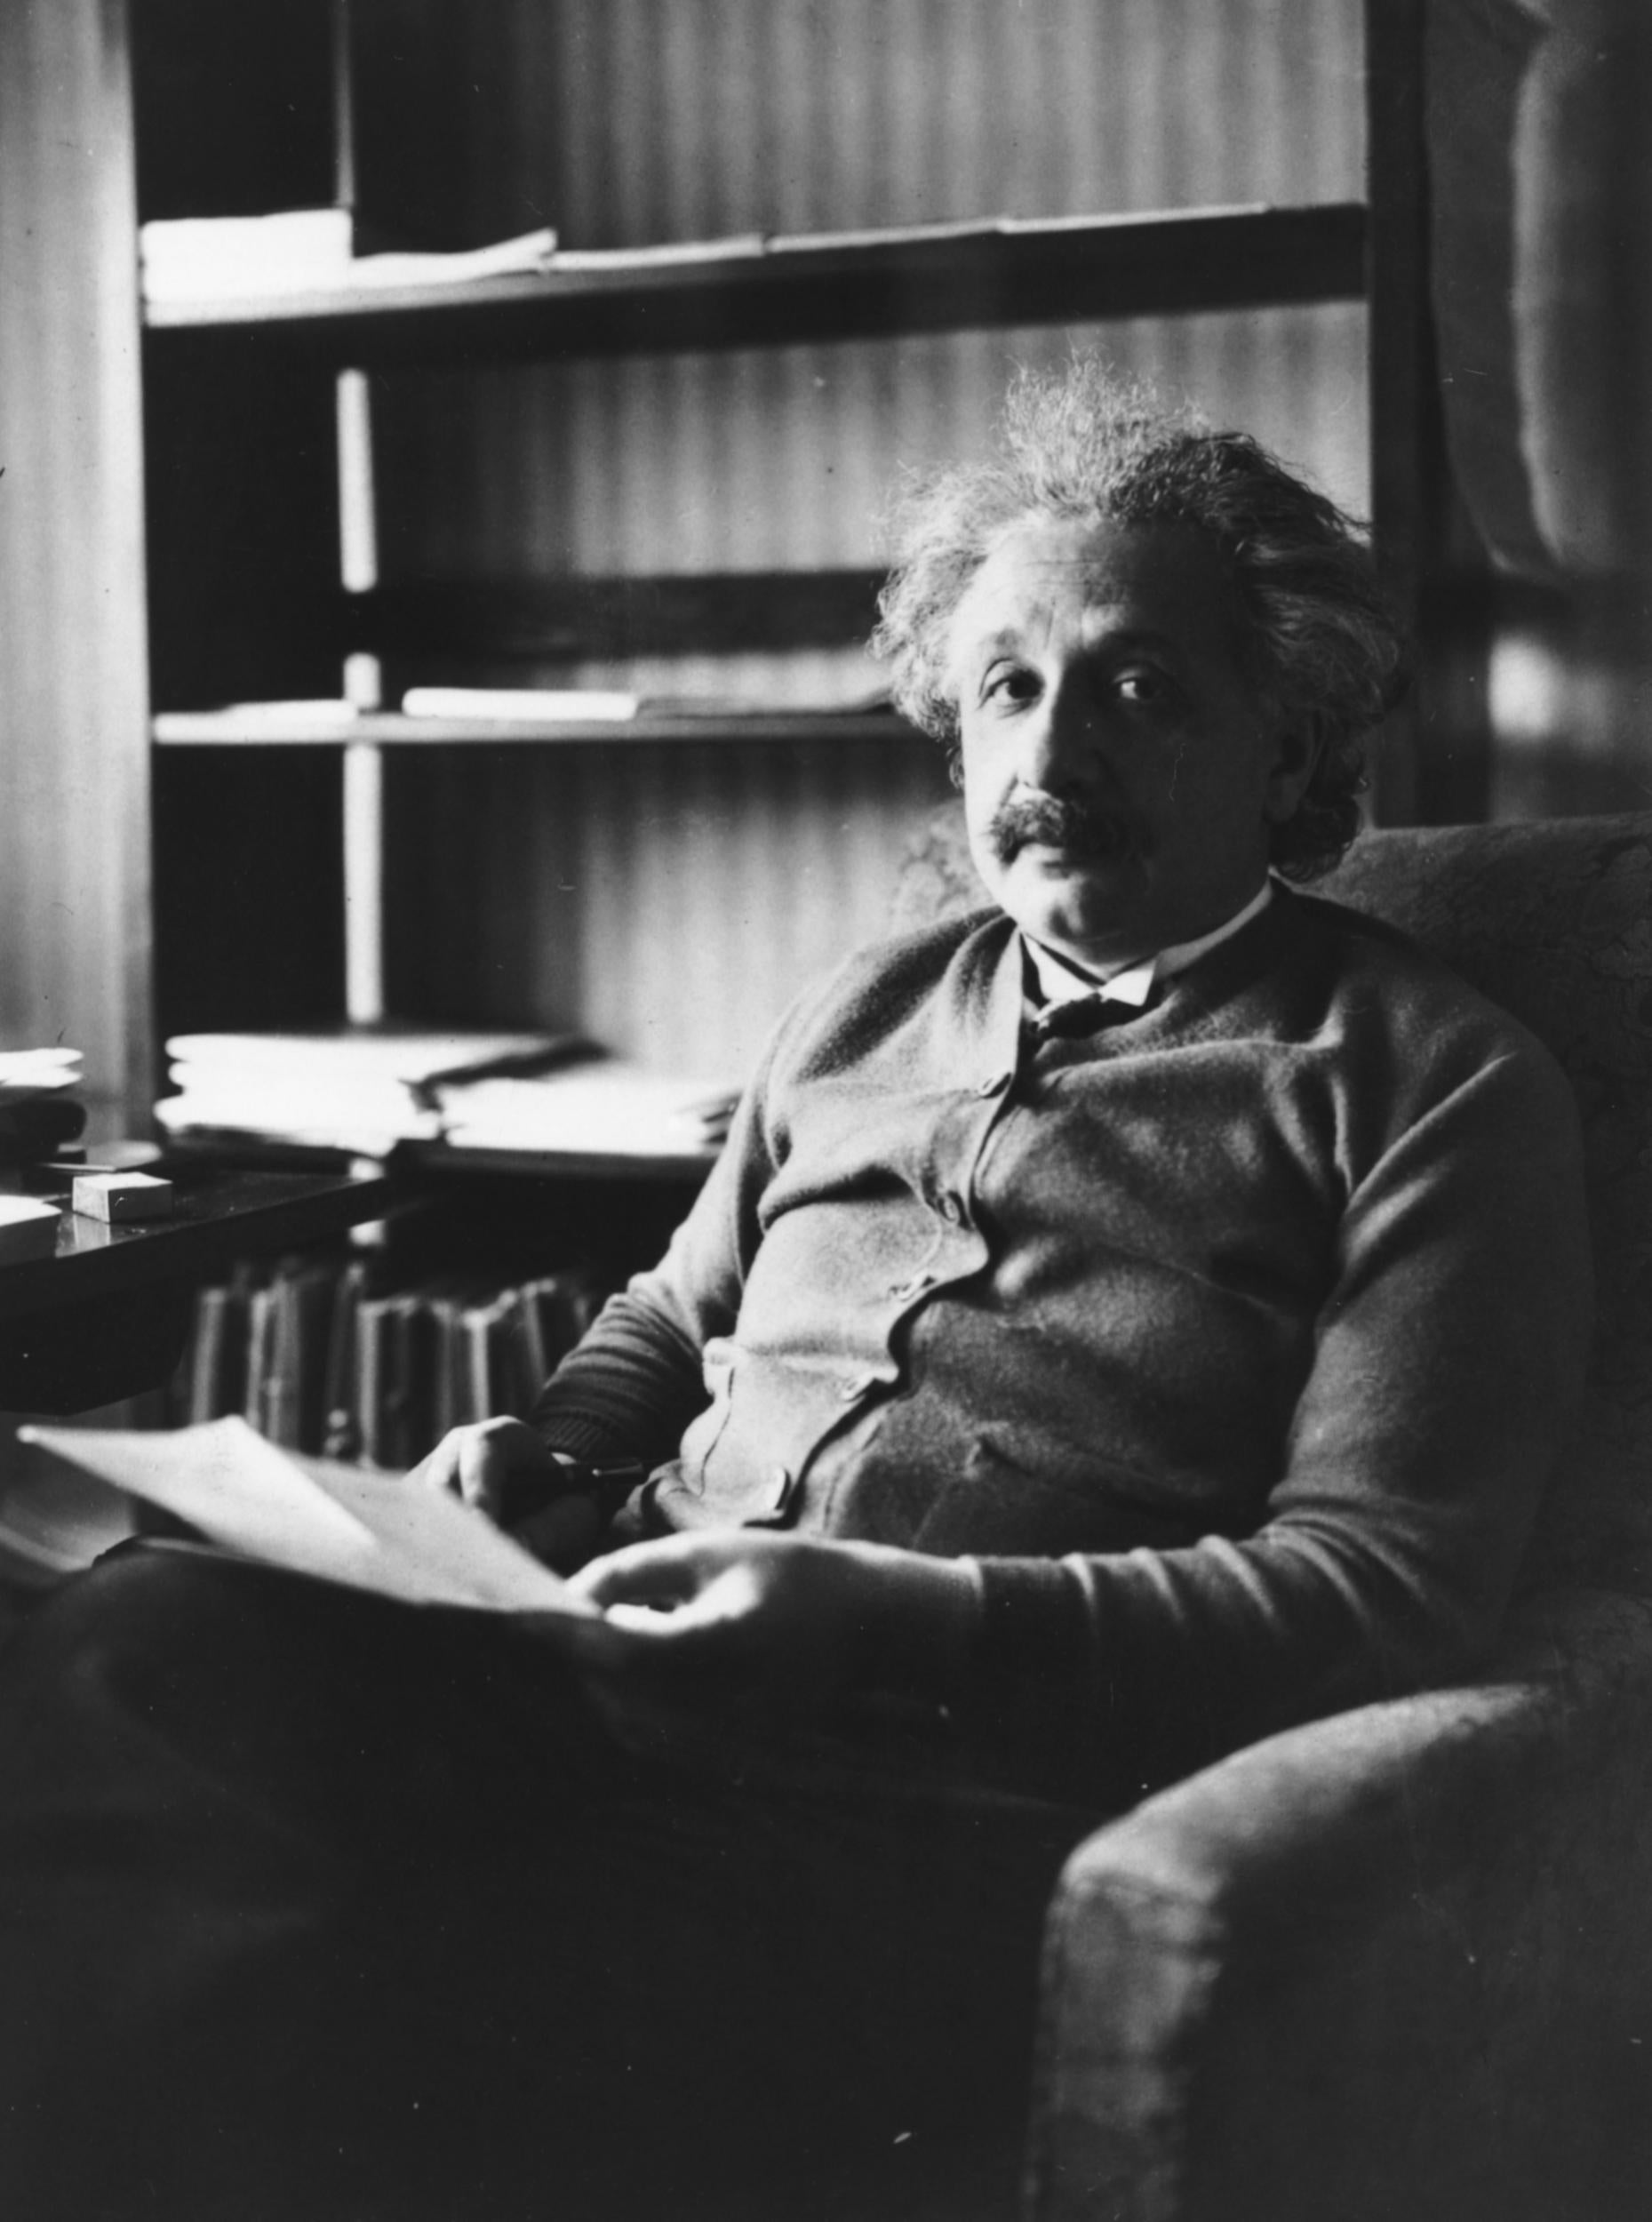 It was only through Einstein’s breakthrough that other scientists could make further progress in the field of quantum mechanics